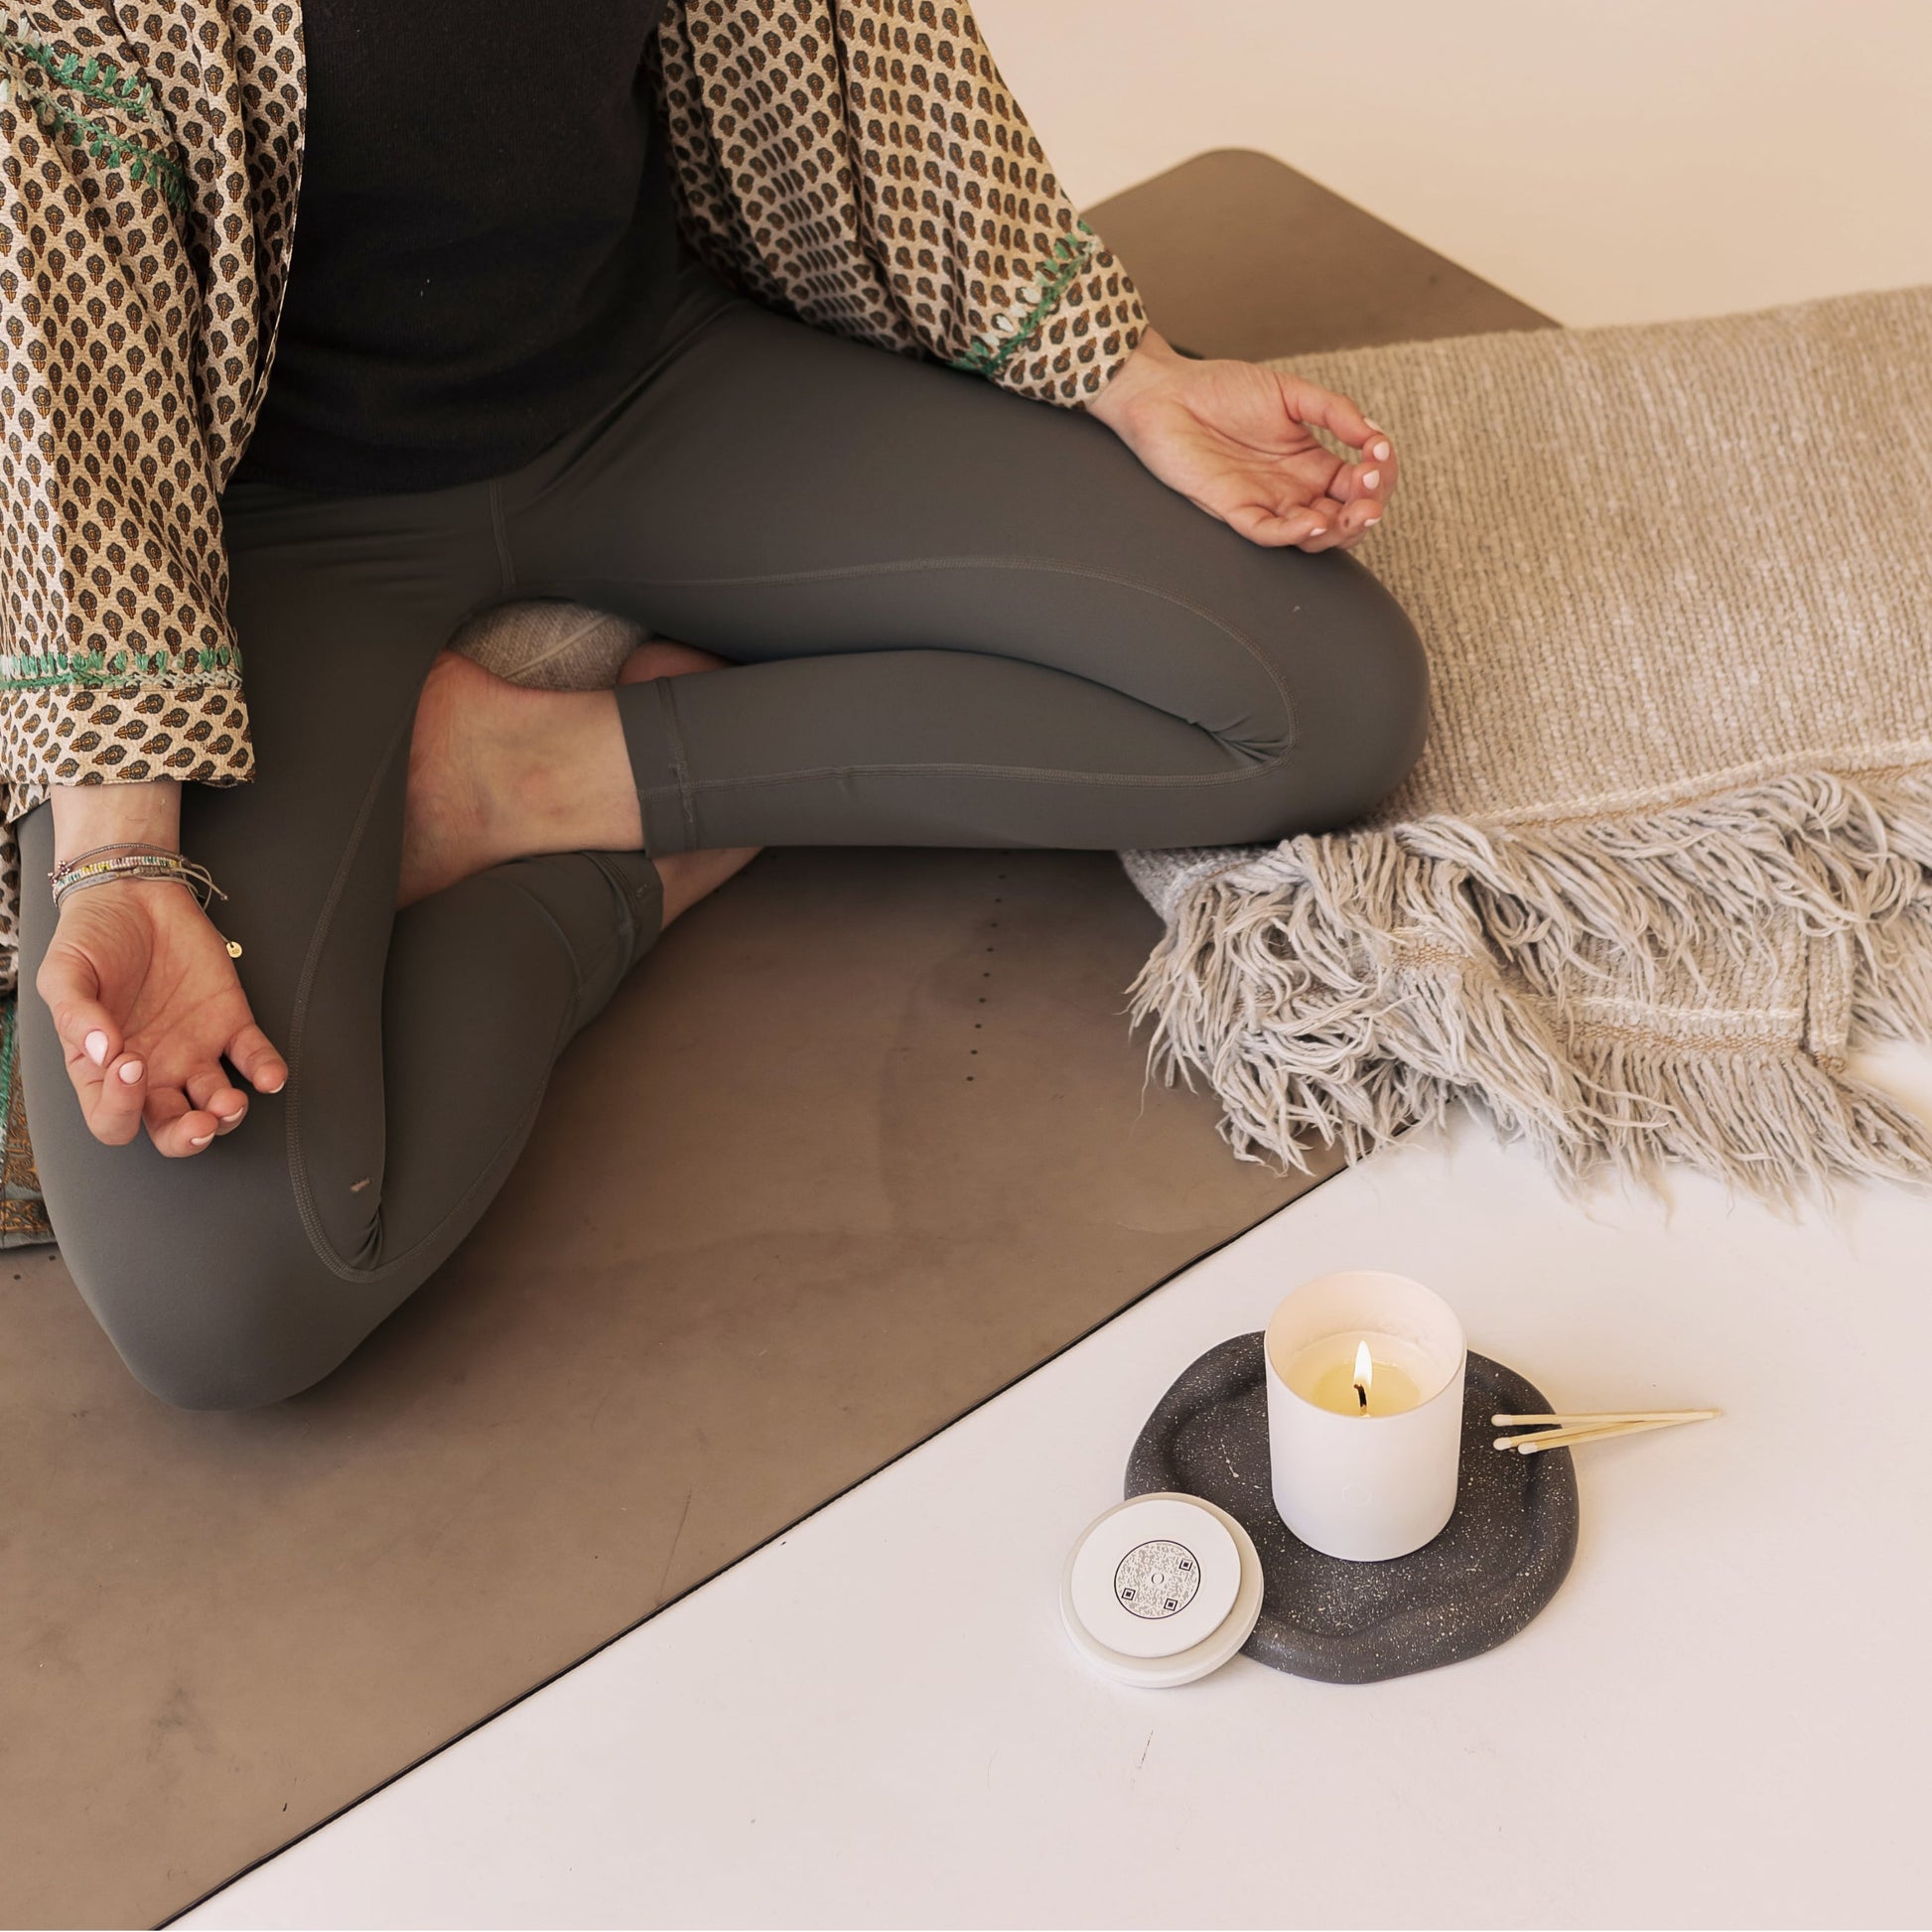 Shō-moon Calm Meditation Candle and someone meditating with a candle